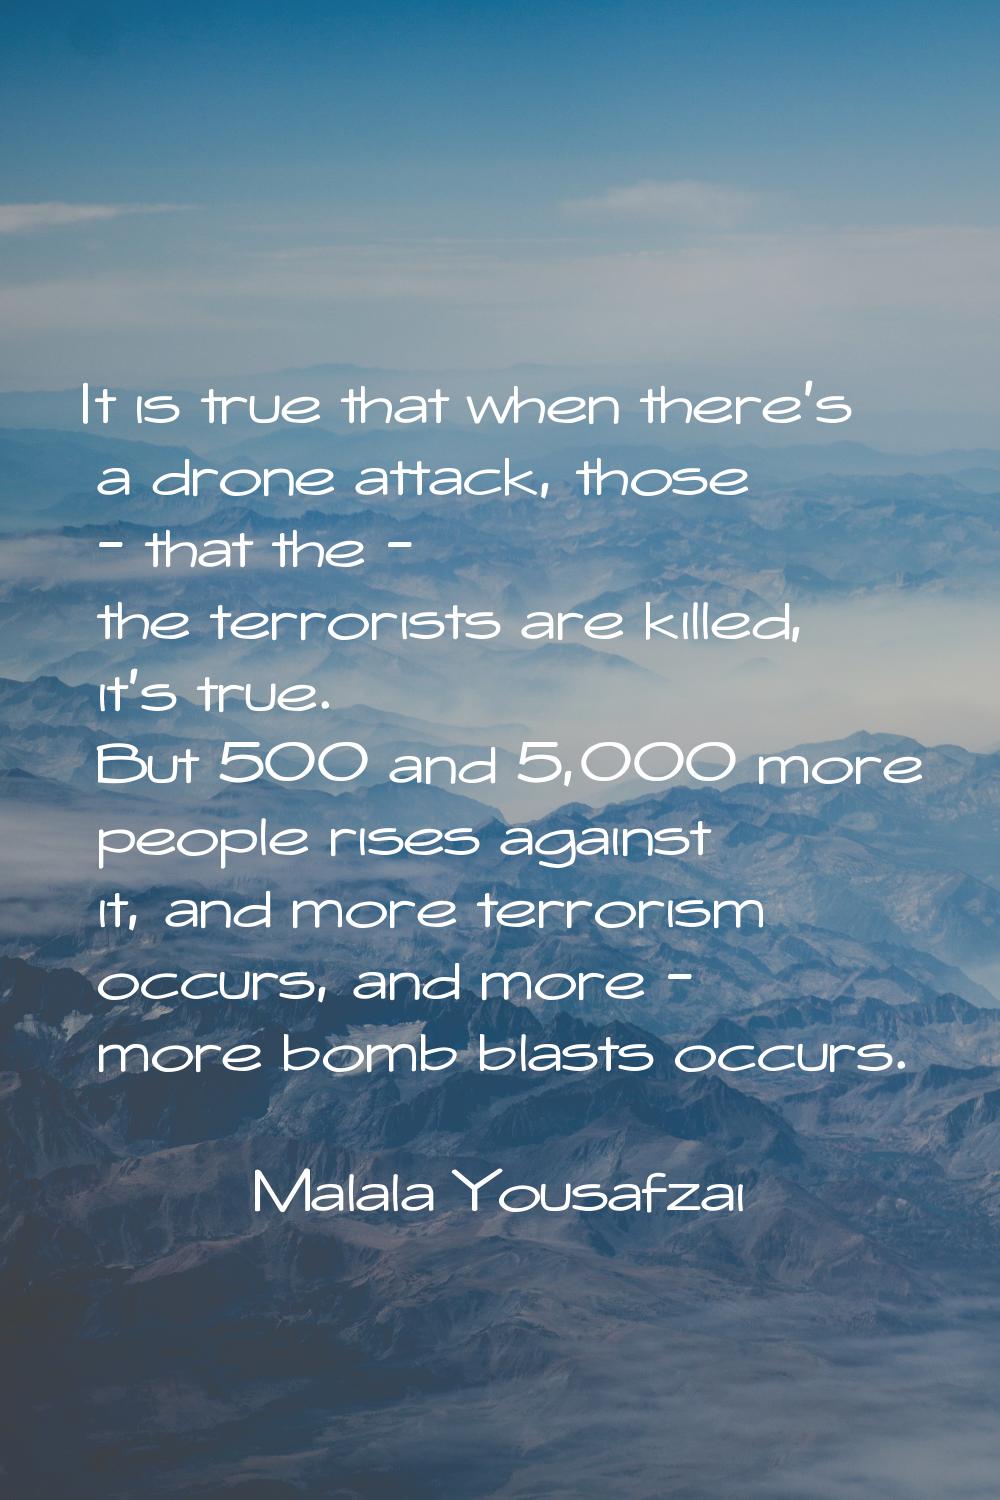 It is true that when there's a drone attack, those - that the - the terrorists are killed, it's tru